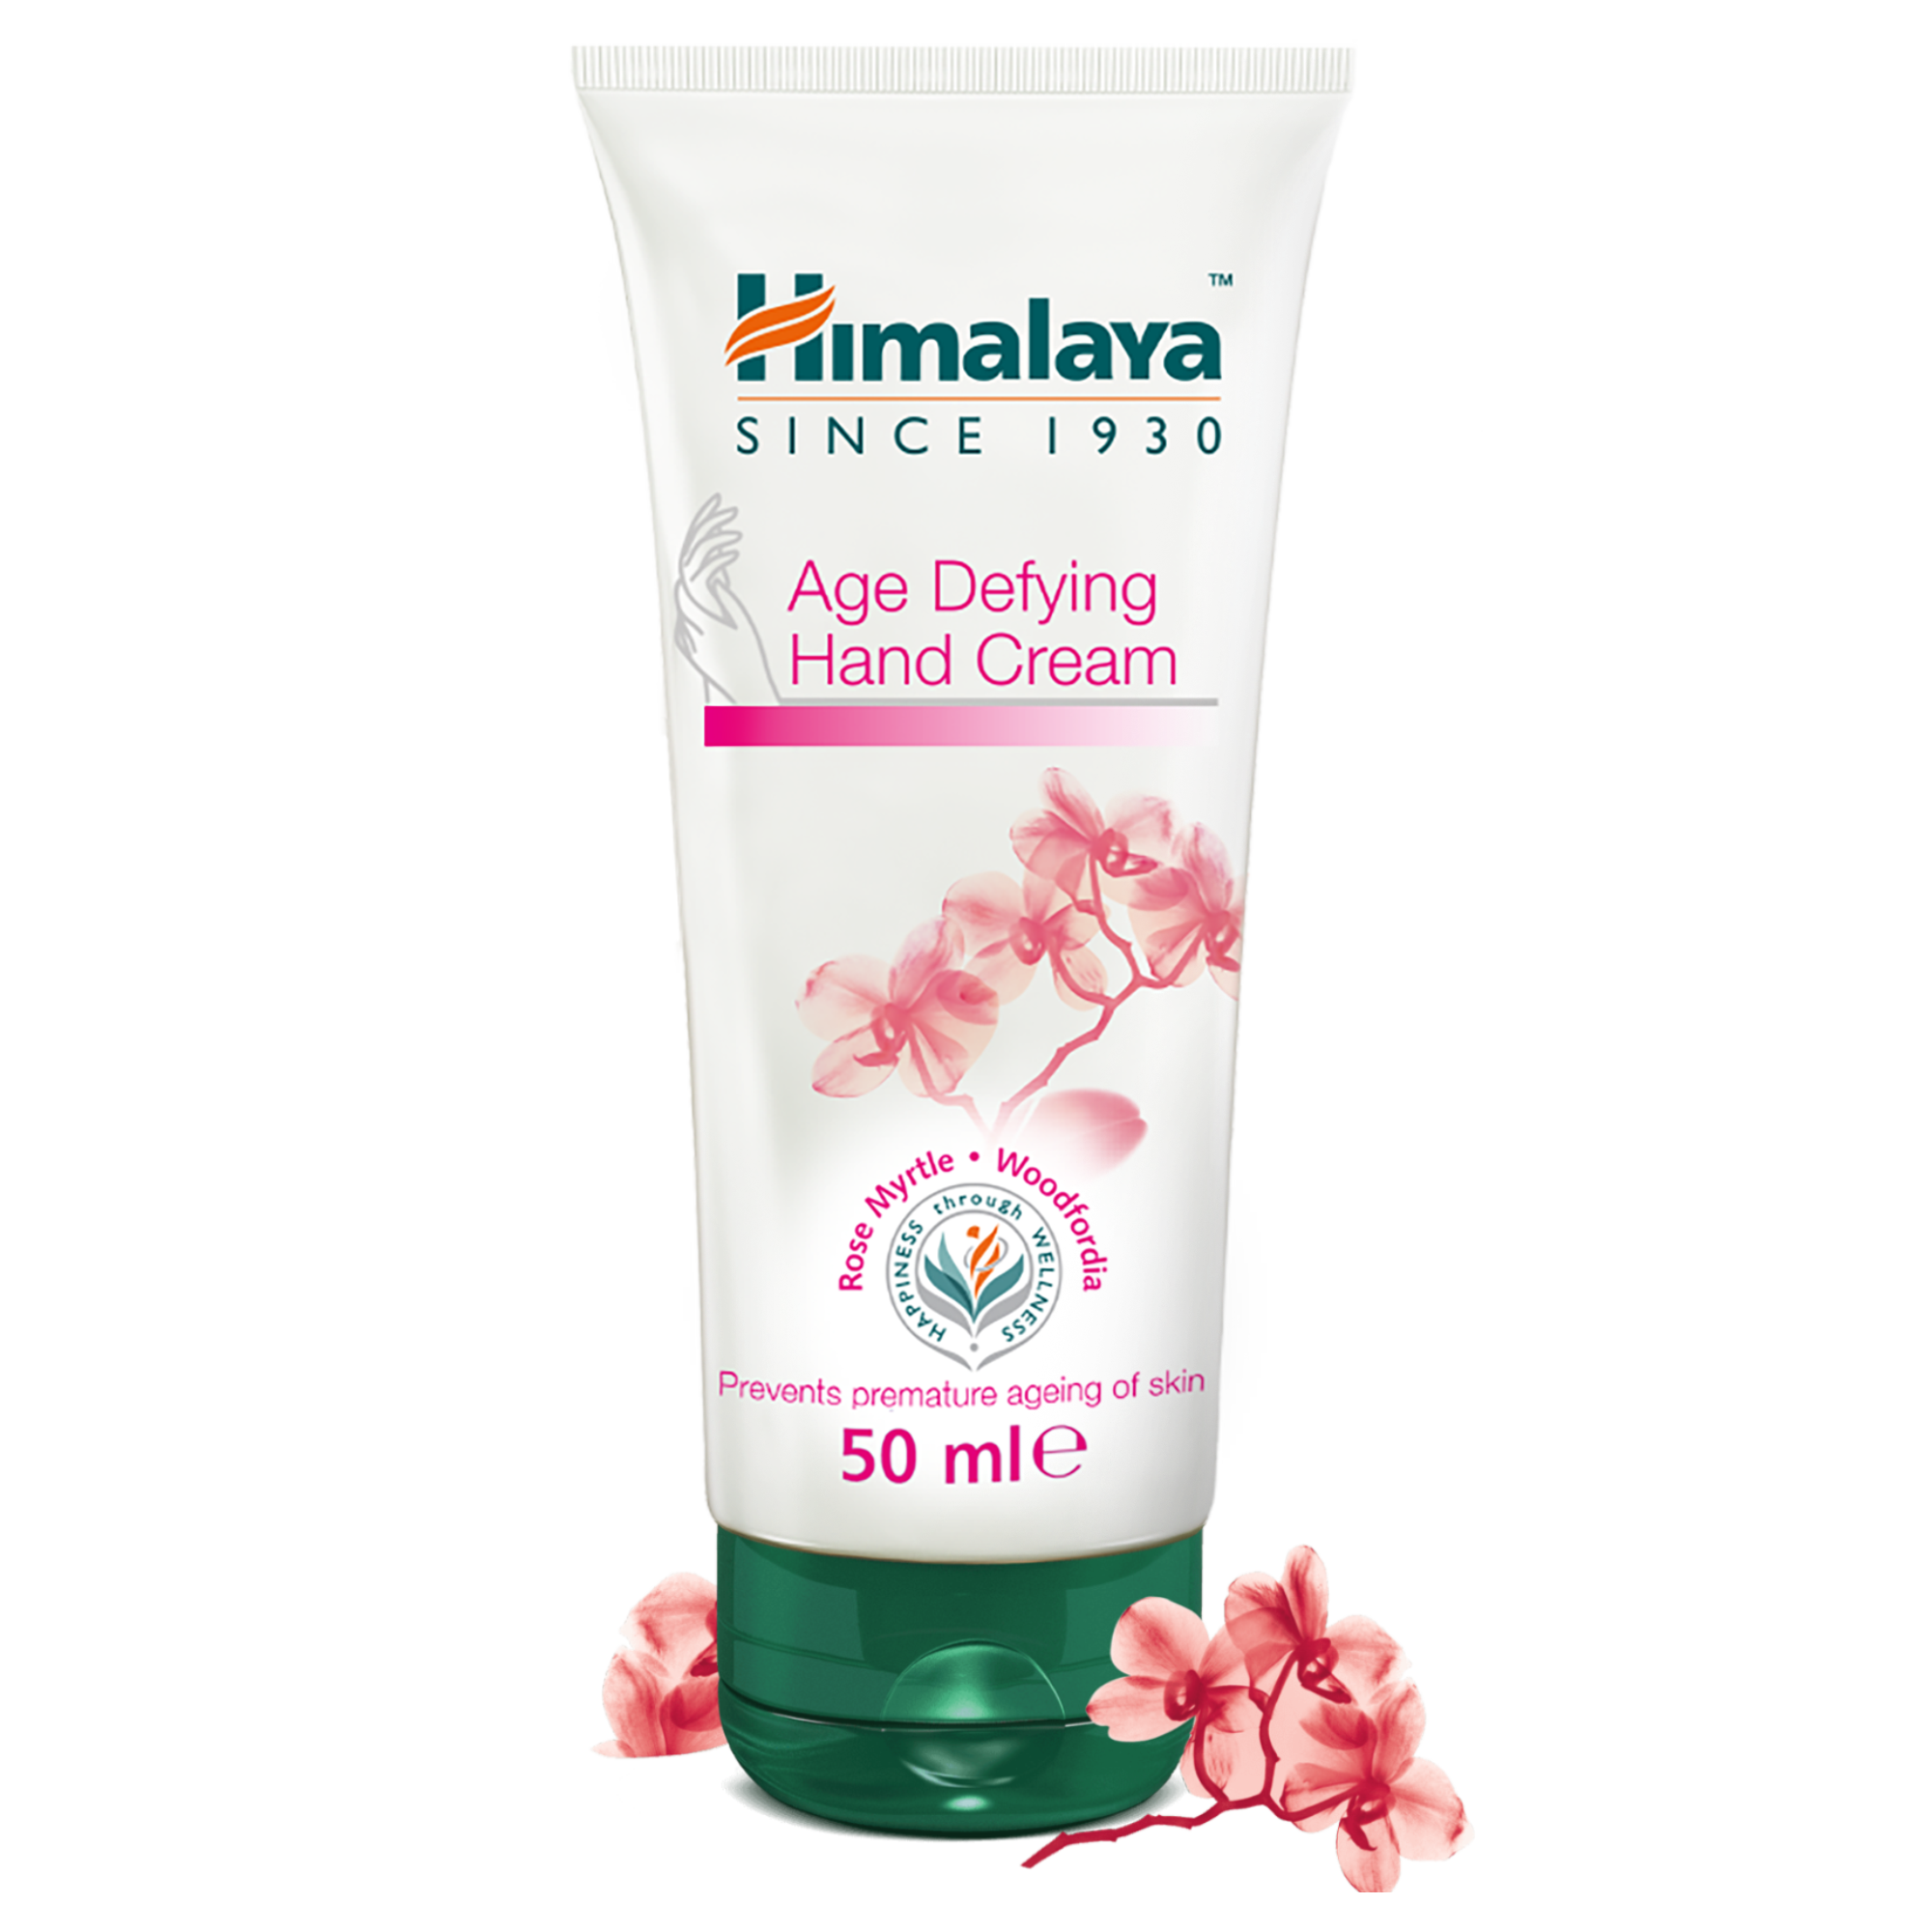 Himalaya Age Defying Hand Cream 50ml - Reduces Wrinkles & Fine Lines 